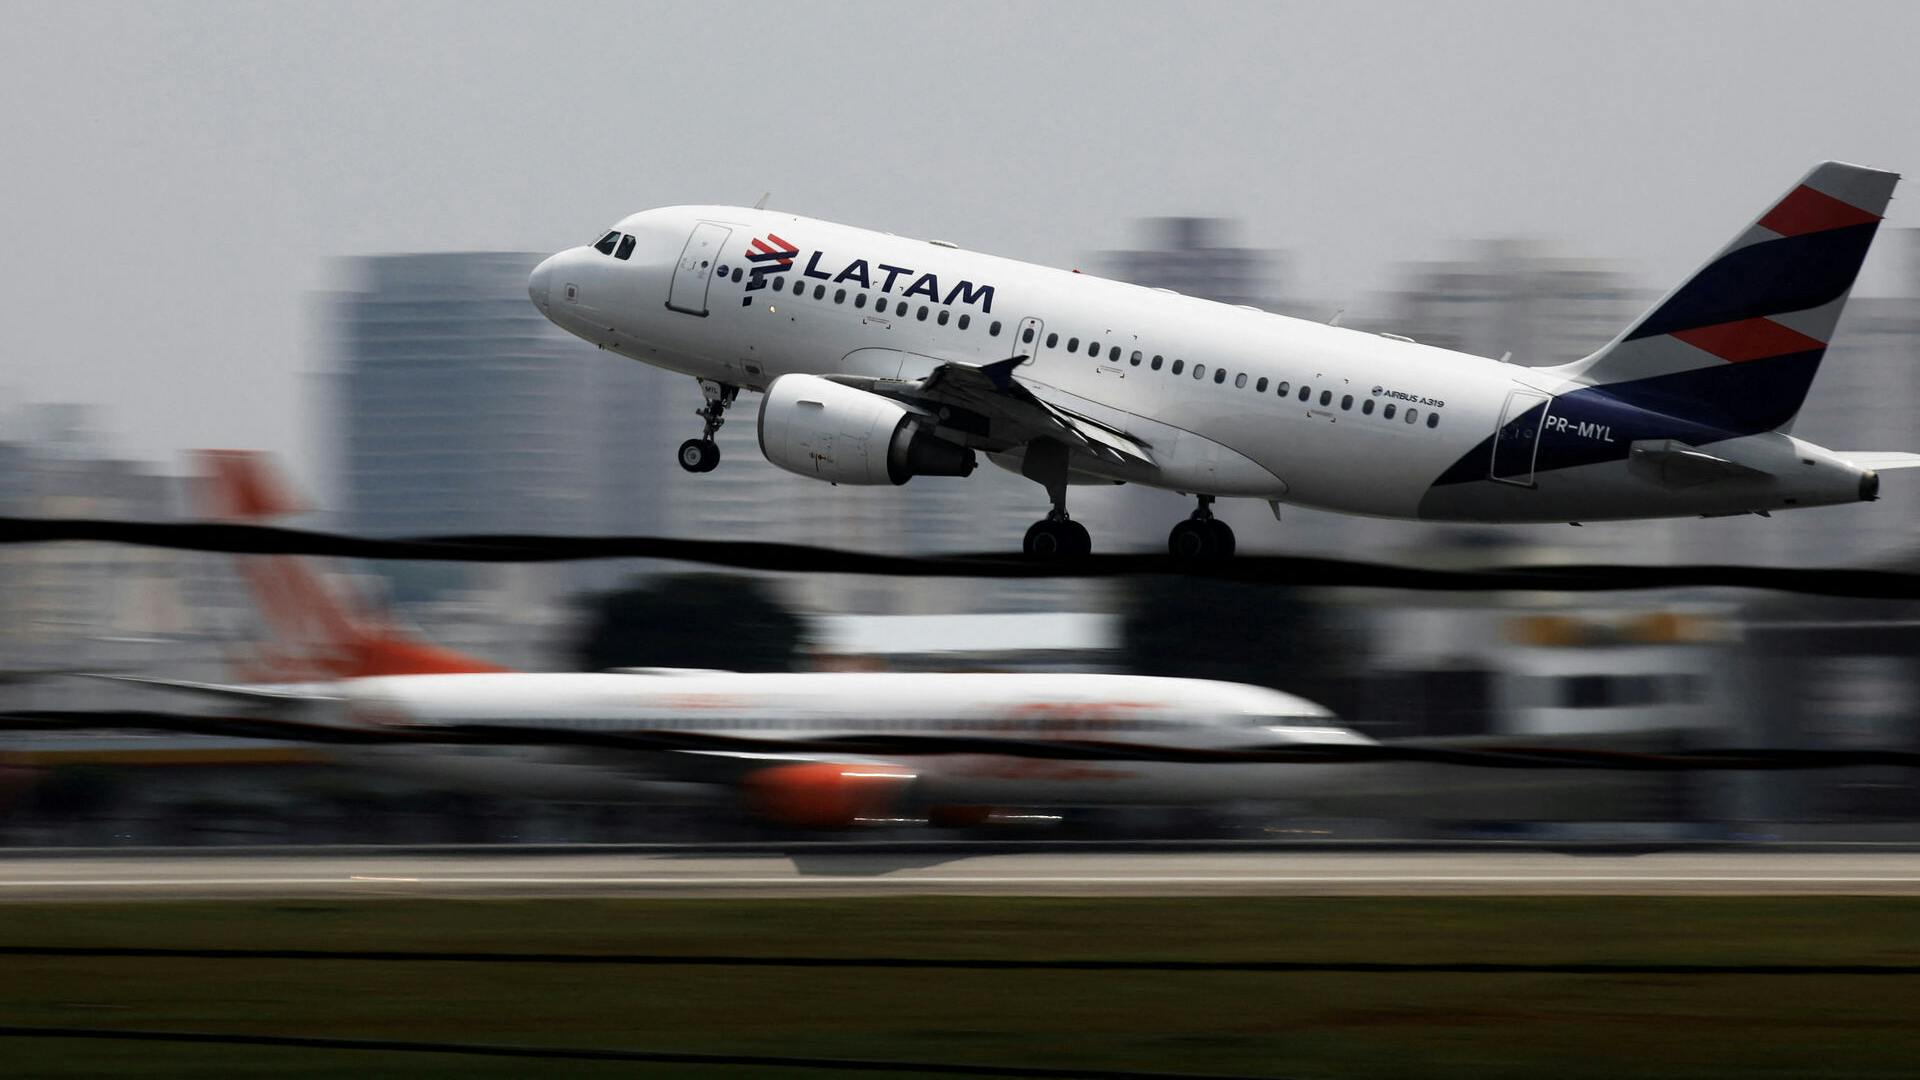 FILE PHOTO: A LATAM Airlines Brasil Airbus A319-100 plane takes off from Congonhas airport in Sao Paulo, Brazil December 19, 2017. REUTERS/Nacho Doce/File Photo